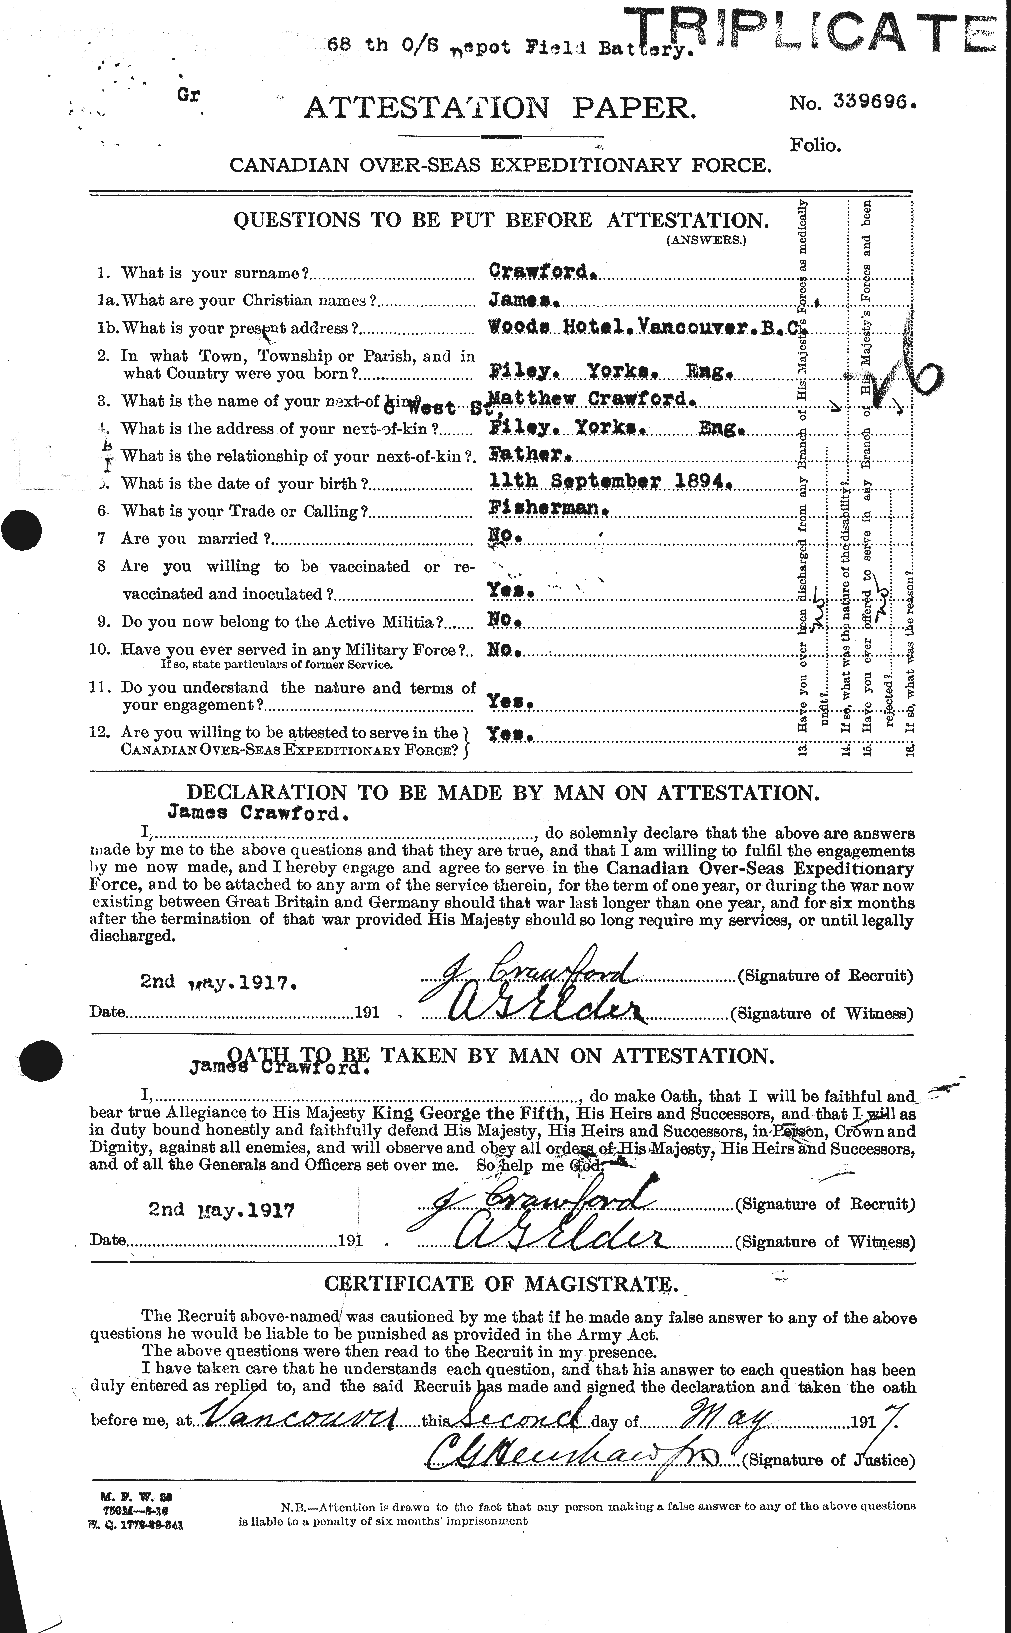 Personnel Records of the First World War - CEF 062764a